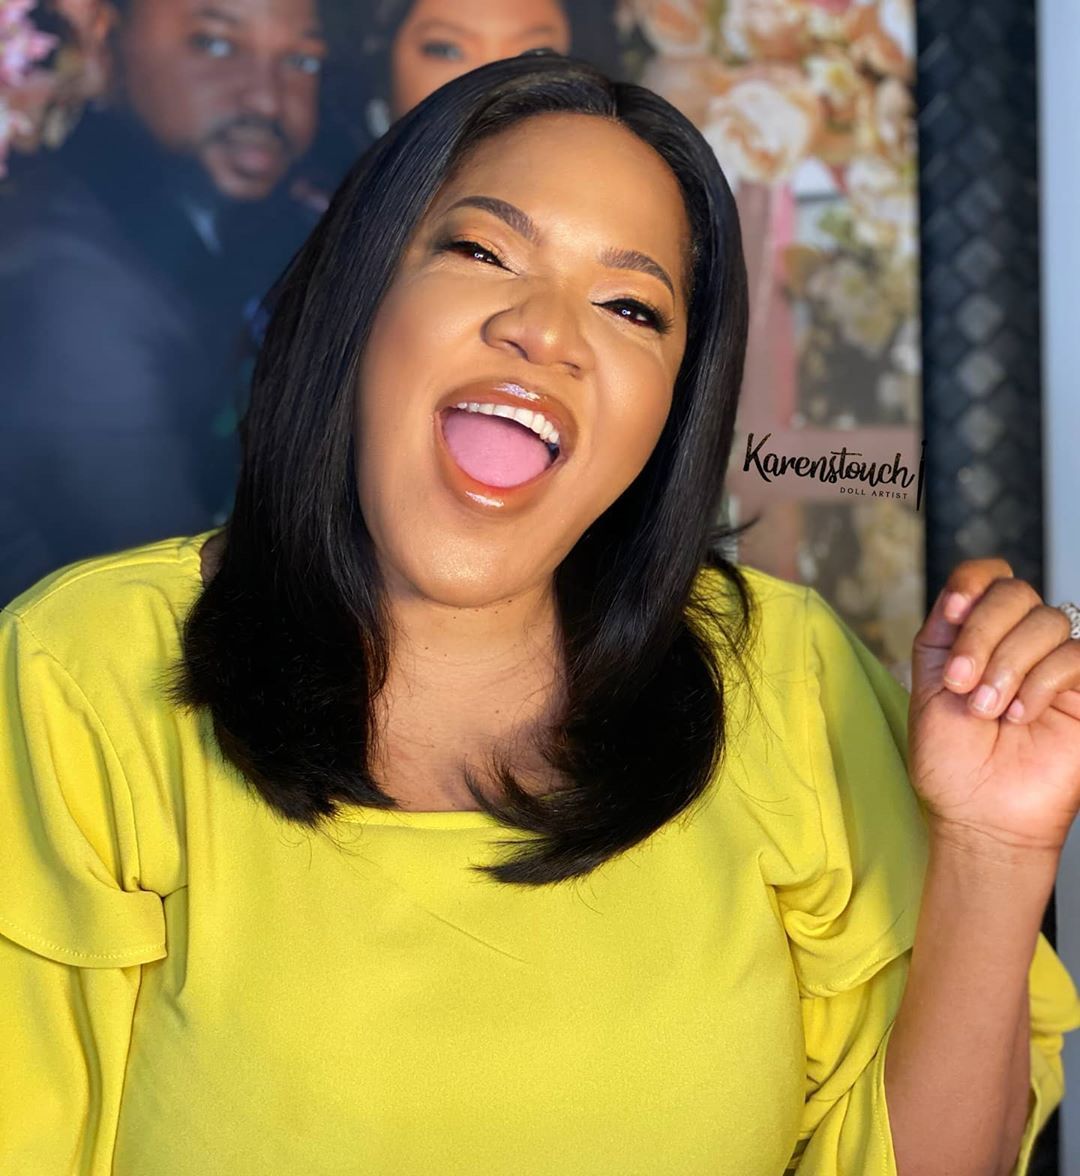 'Stay safe and healthy' – Actress, Toyin Abraham tell fans [VIDEO]